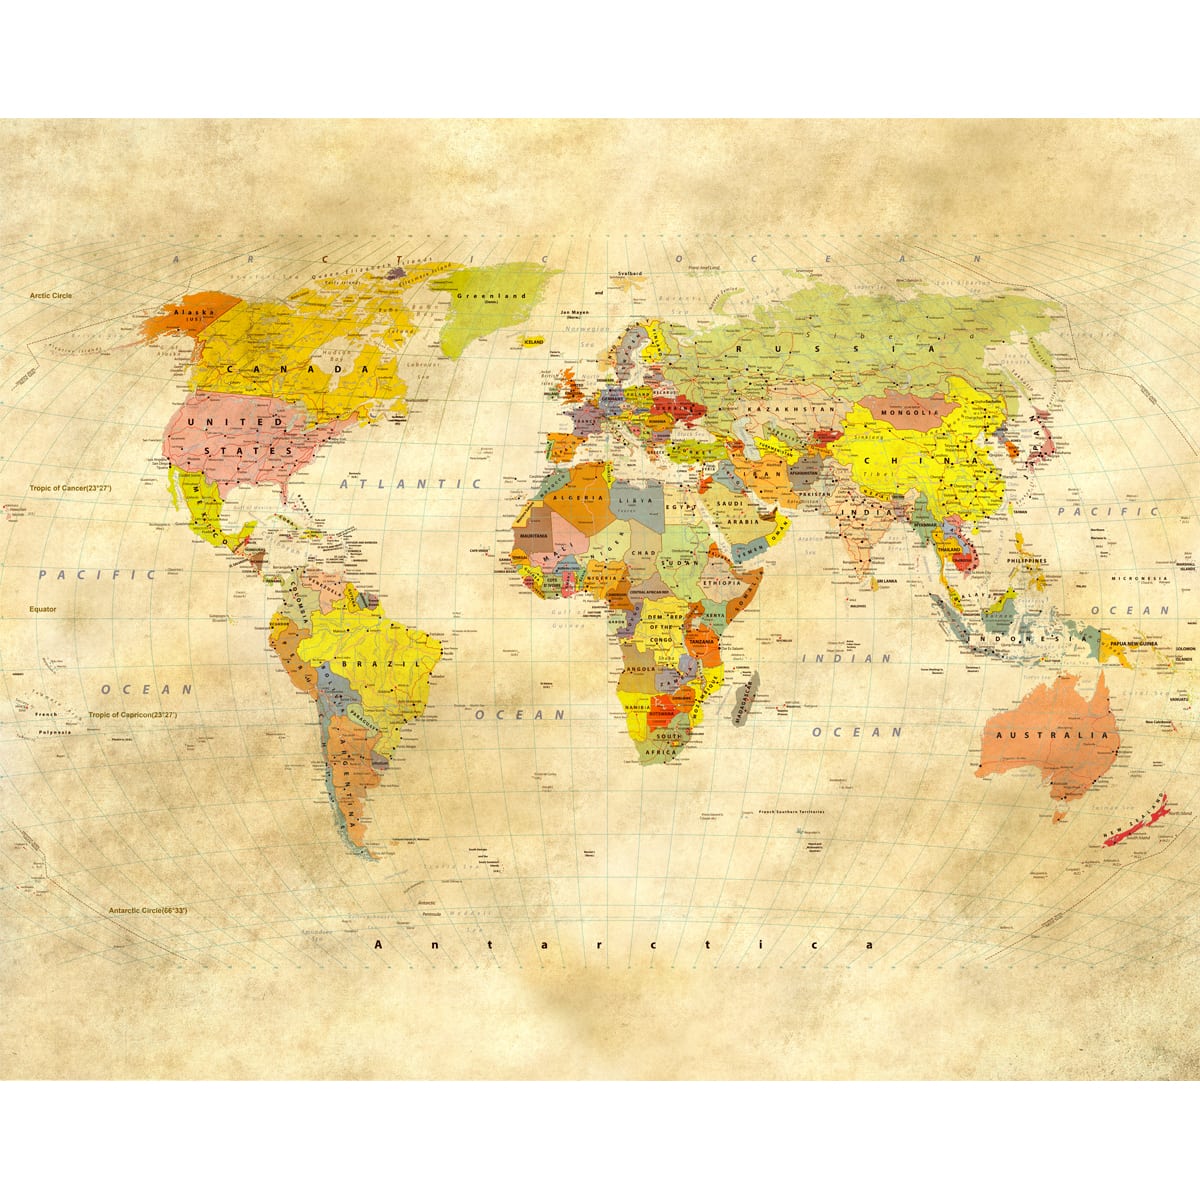 Premium Vintage World Map Wallpaper, Homes & Offices, Customised